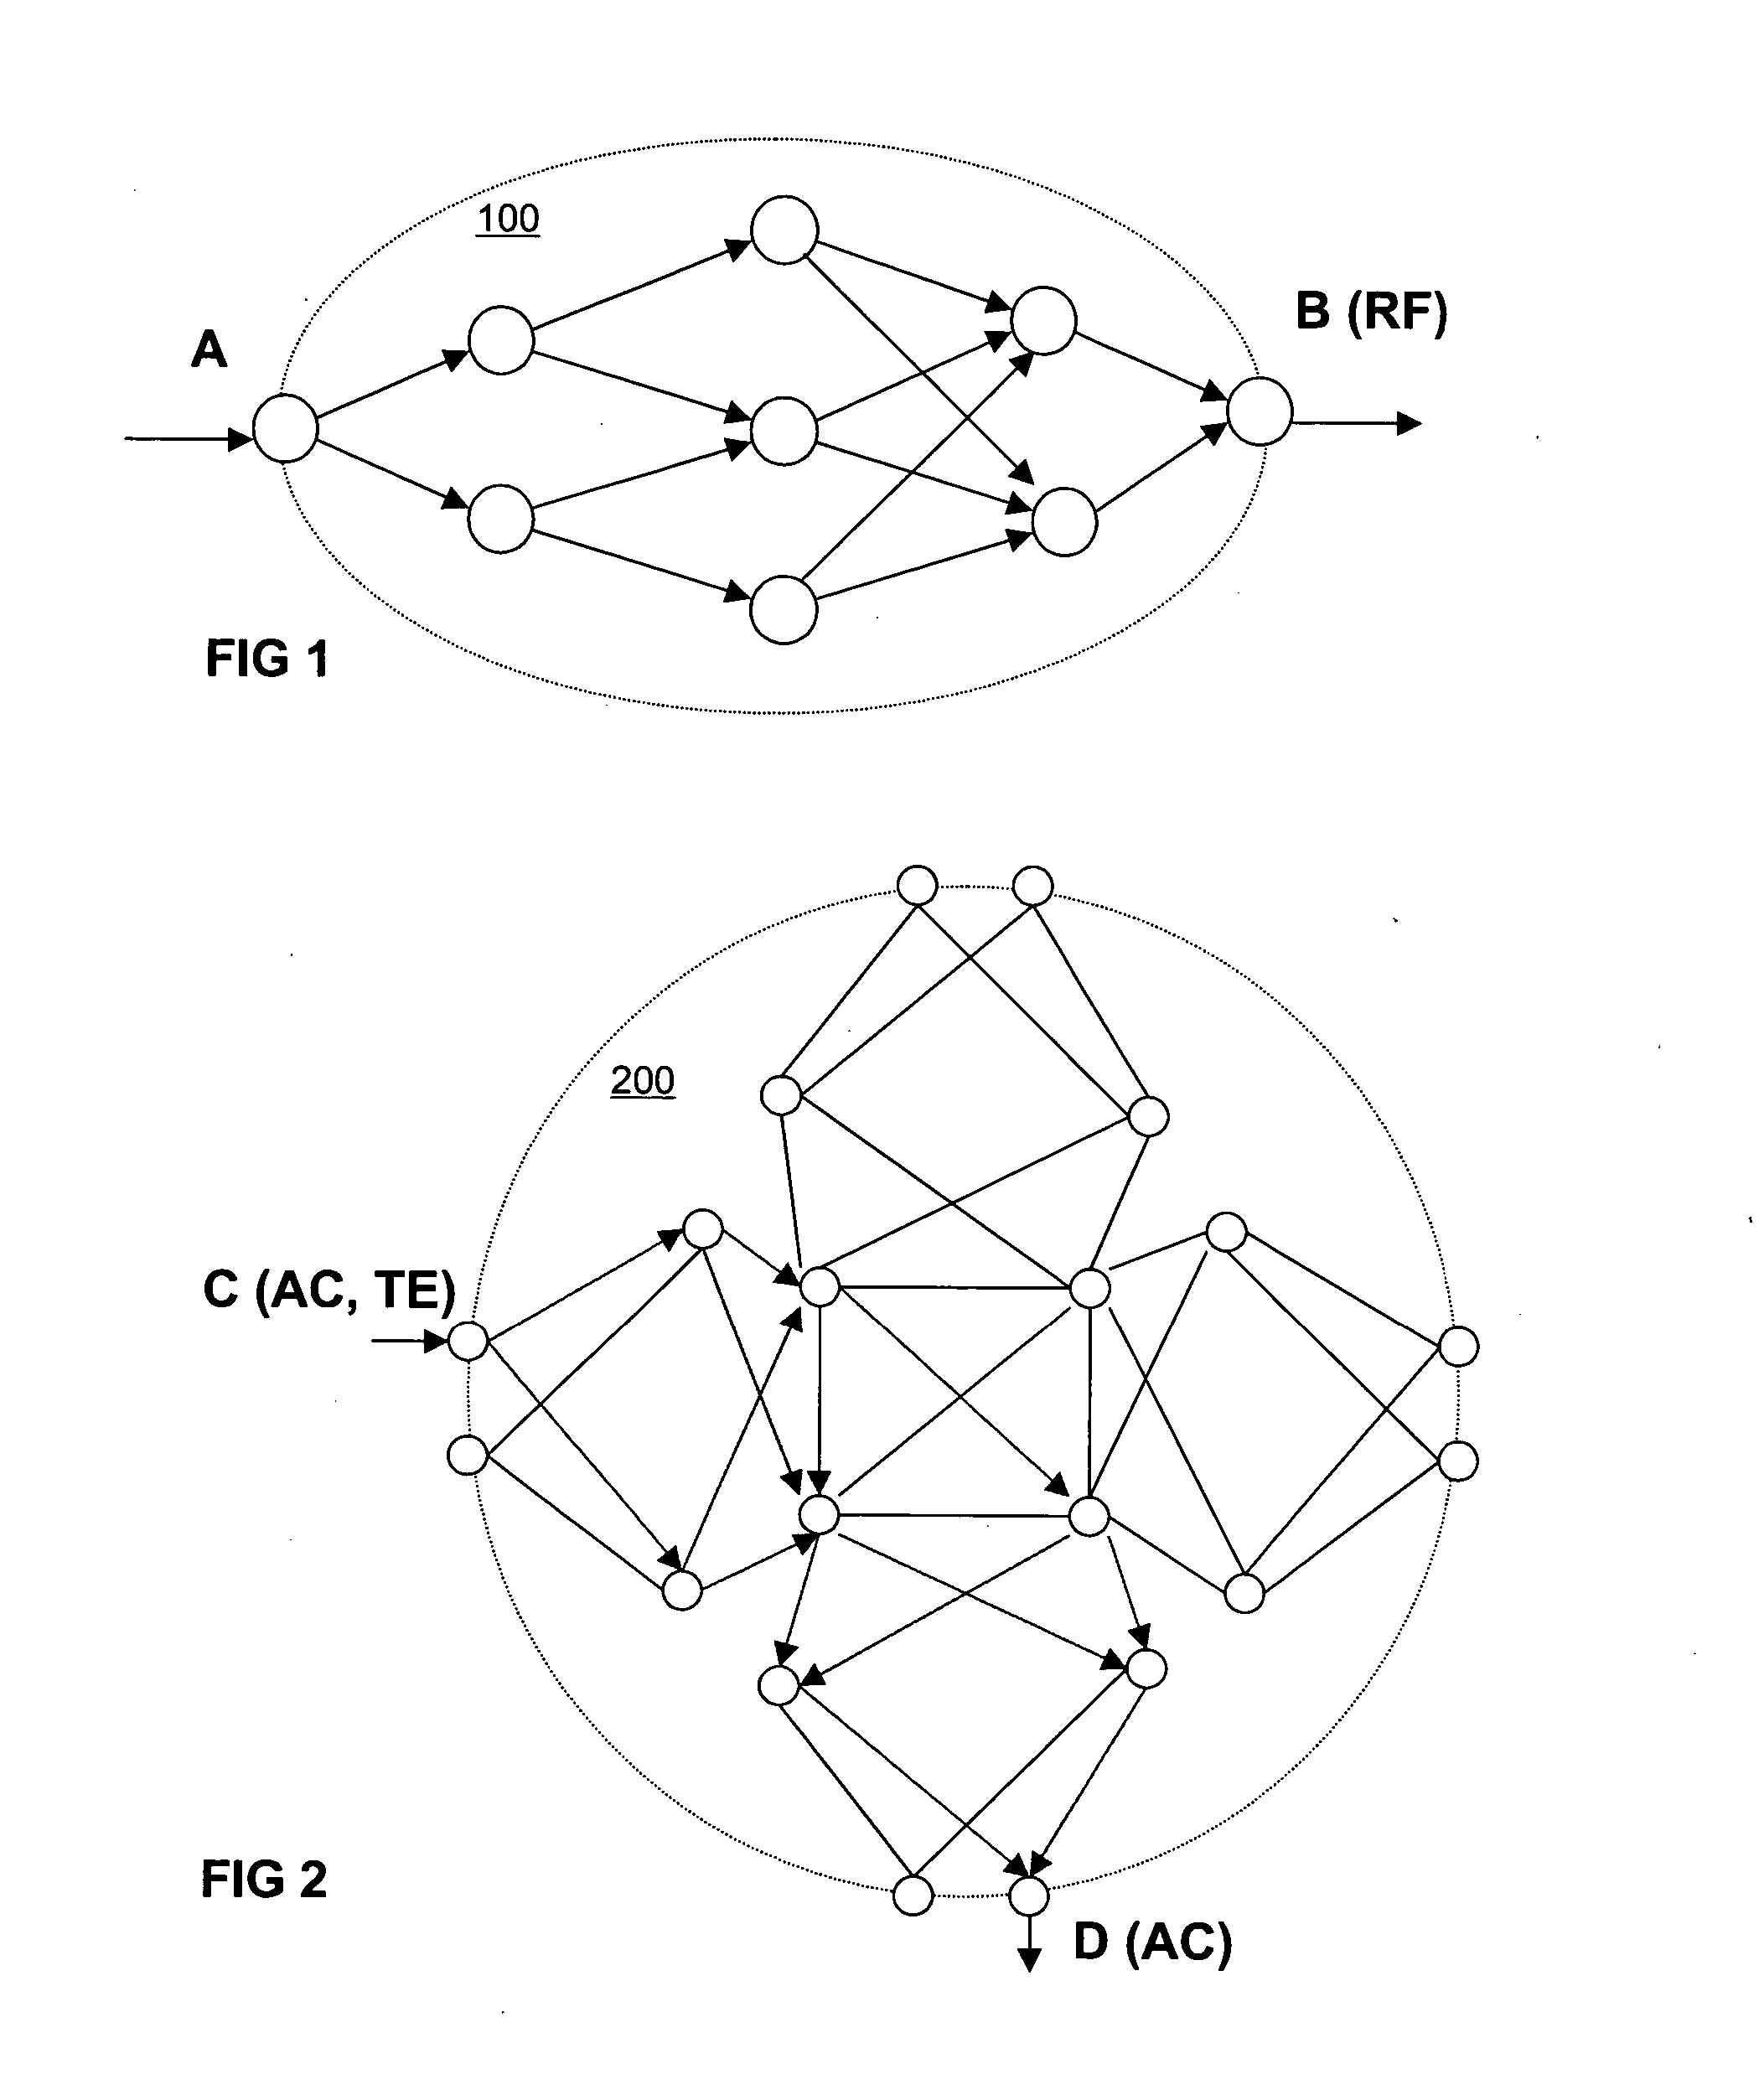 Data transmission in a packet-oriented communication network